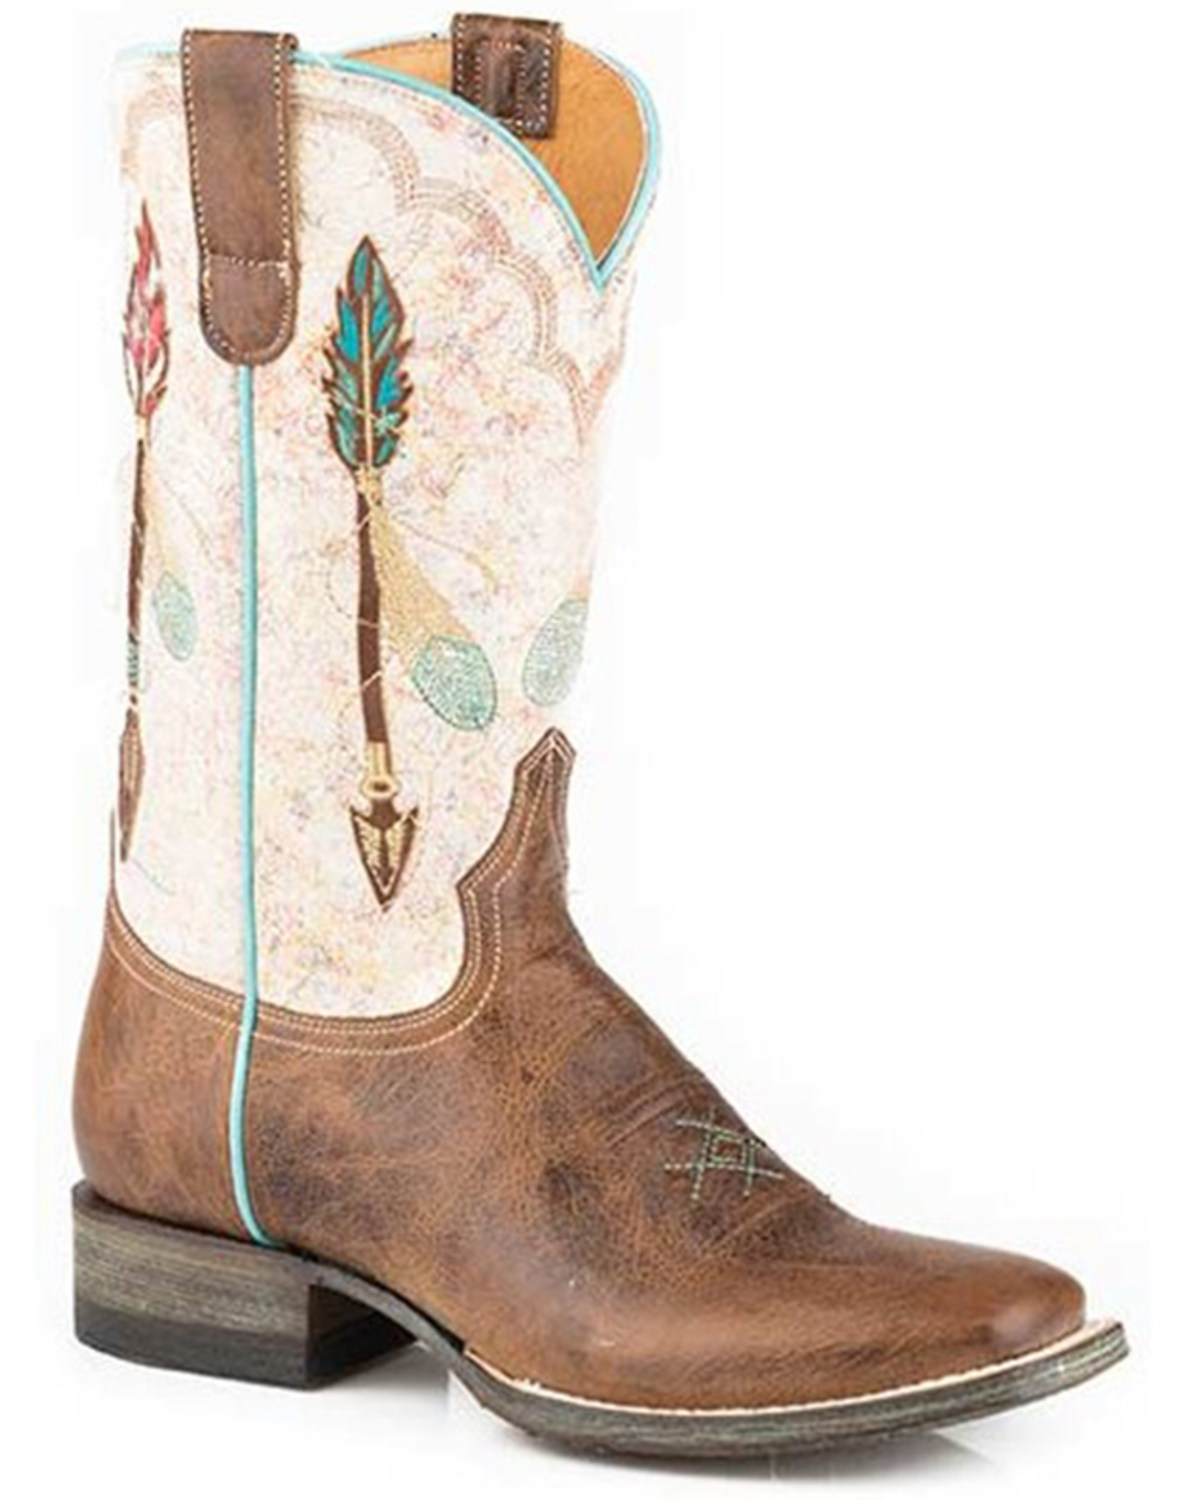 Roper Women's Arrow Feather Embroidered Overlay Western Boots - Square Toe